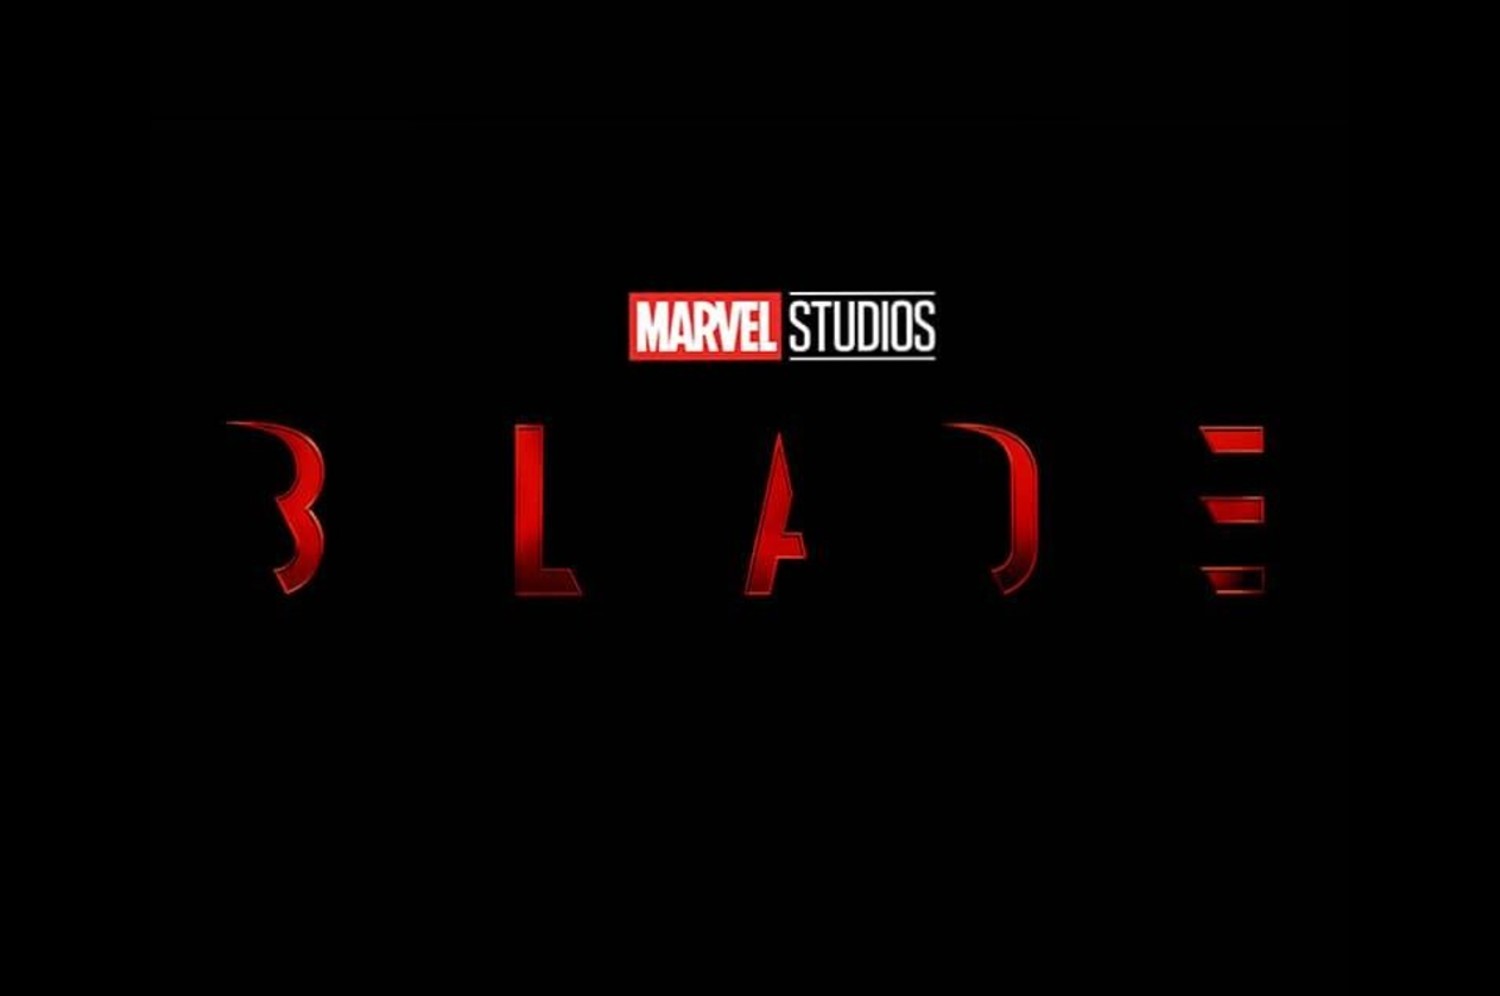 Production on ‘Blade’ Reportedly Pushed Back